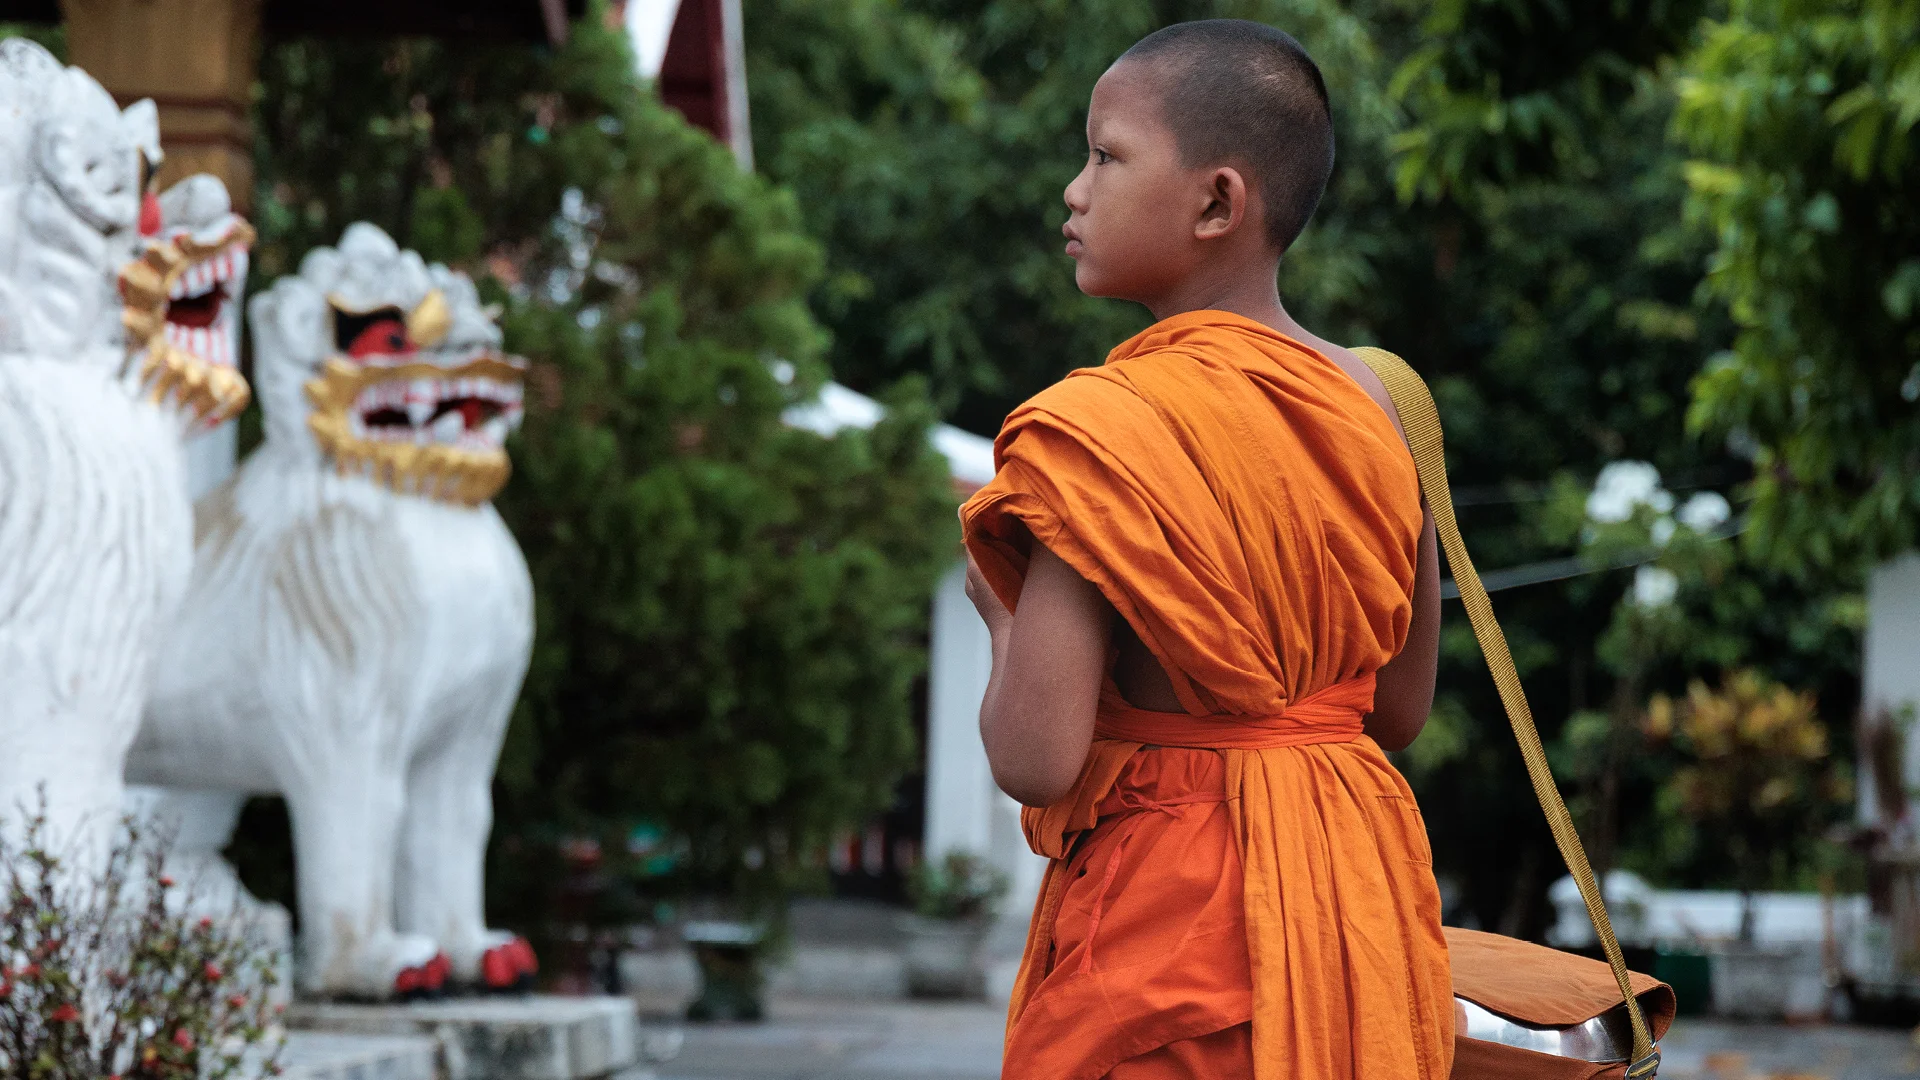 Young Monk in orange robe waiting for the Alms ceremony of Luang Prabang to start